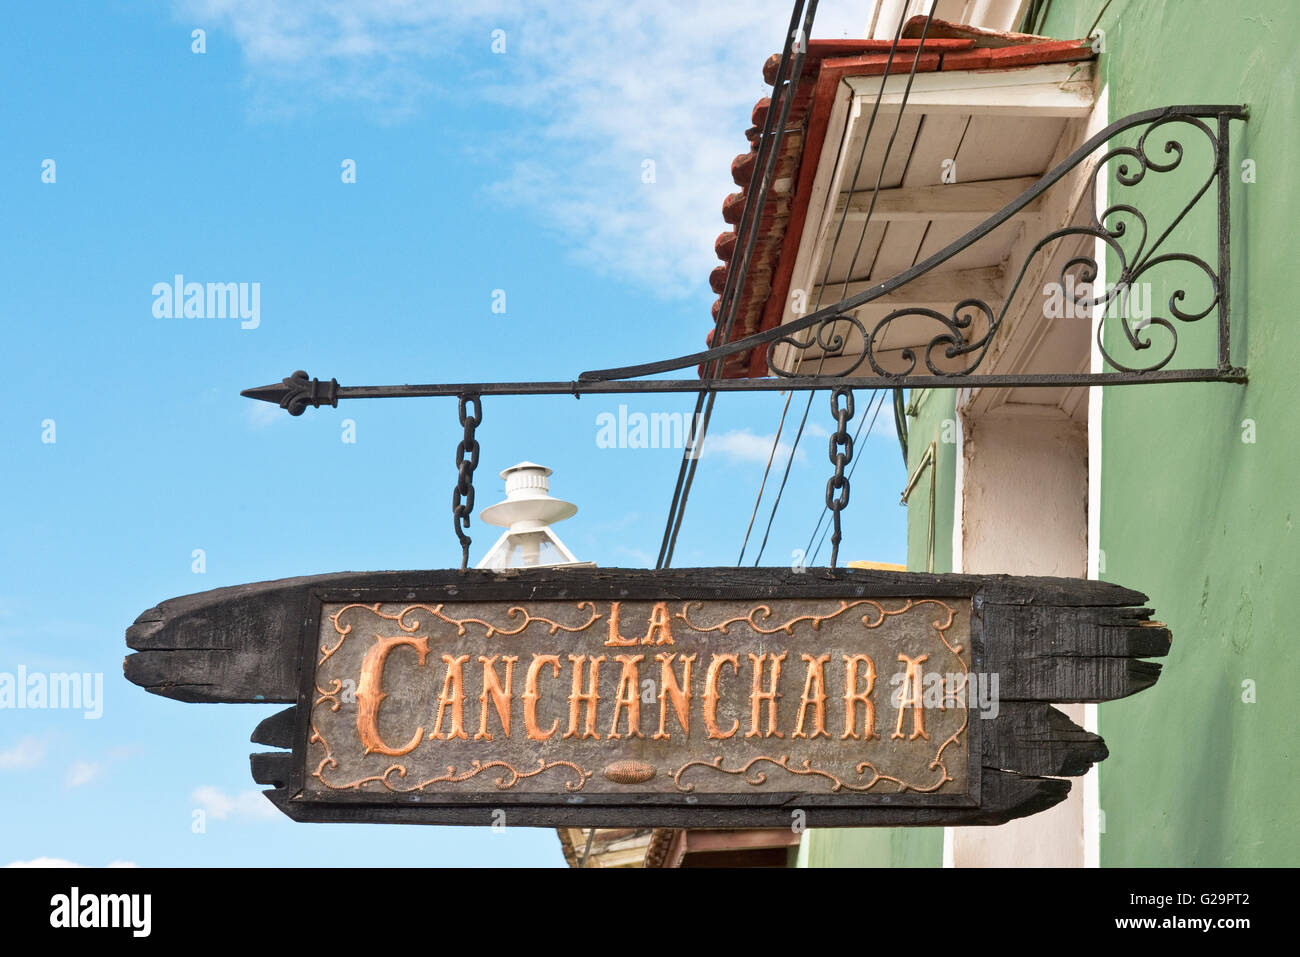 The sign outside La Canchanchara, a bar restaurant/bar in Trinidad famous for its cocktail of rum, honey, lemon and soda water. Stock Photo